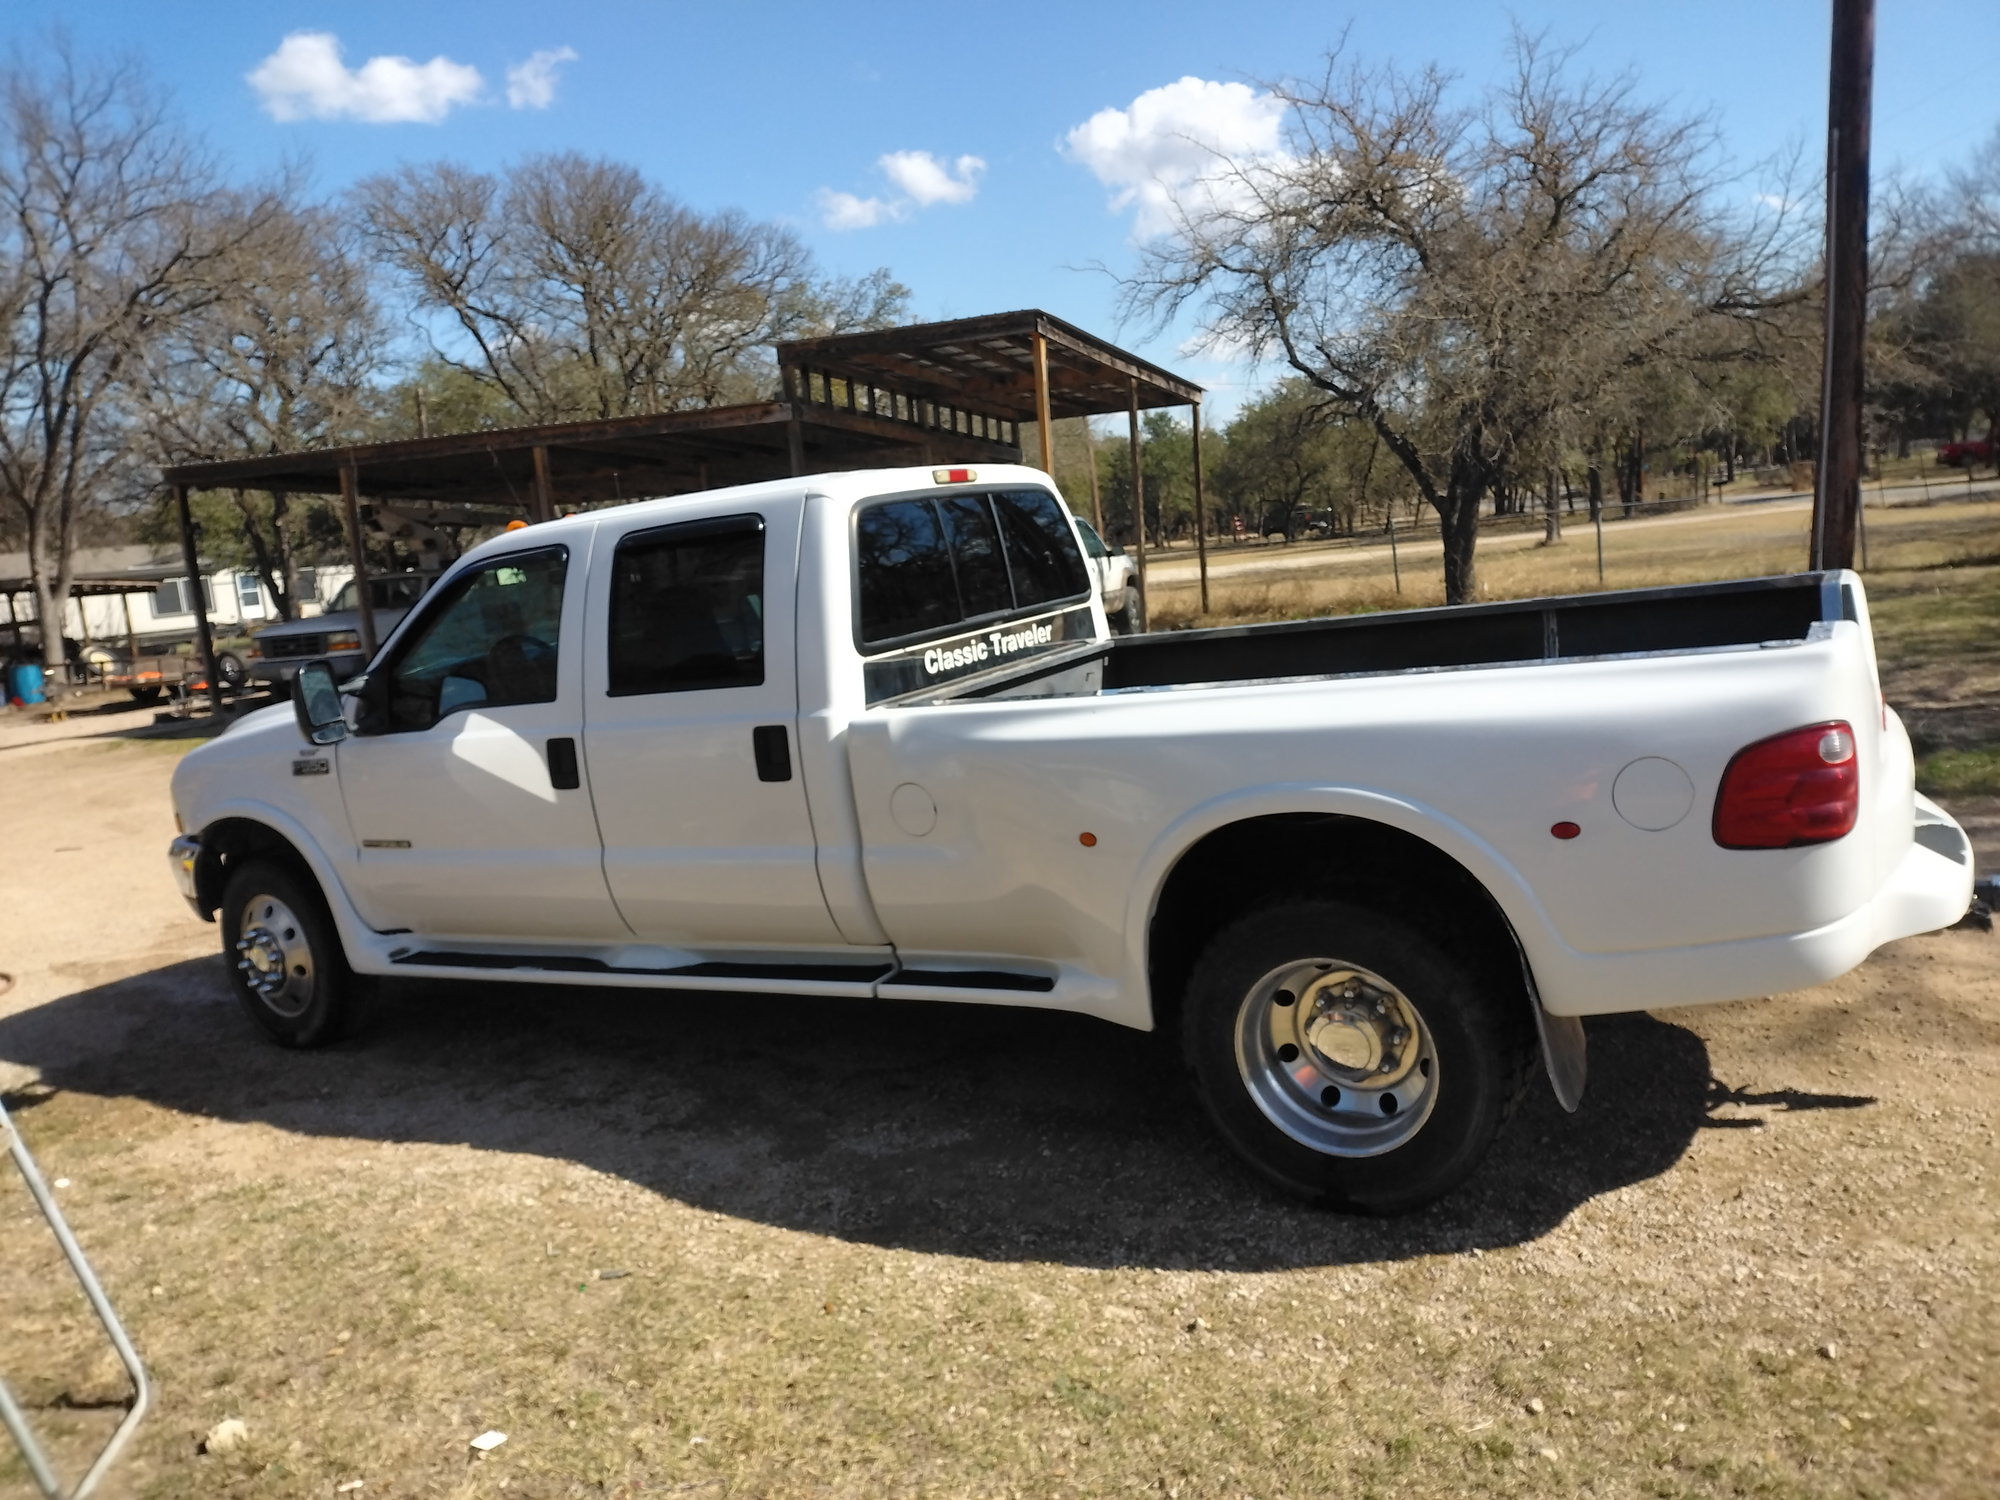 2000 Ford F-550 Super Duty - 2000 7.3 f550 Fontaine classic traveler conversion $25000 - Used - VIN 1fdaw56foyee44050 - 174,300 Miles - 8 cyl - 2WD - Automatic - Truck - White - Liberty Hill, TX 78642, United States